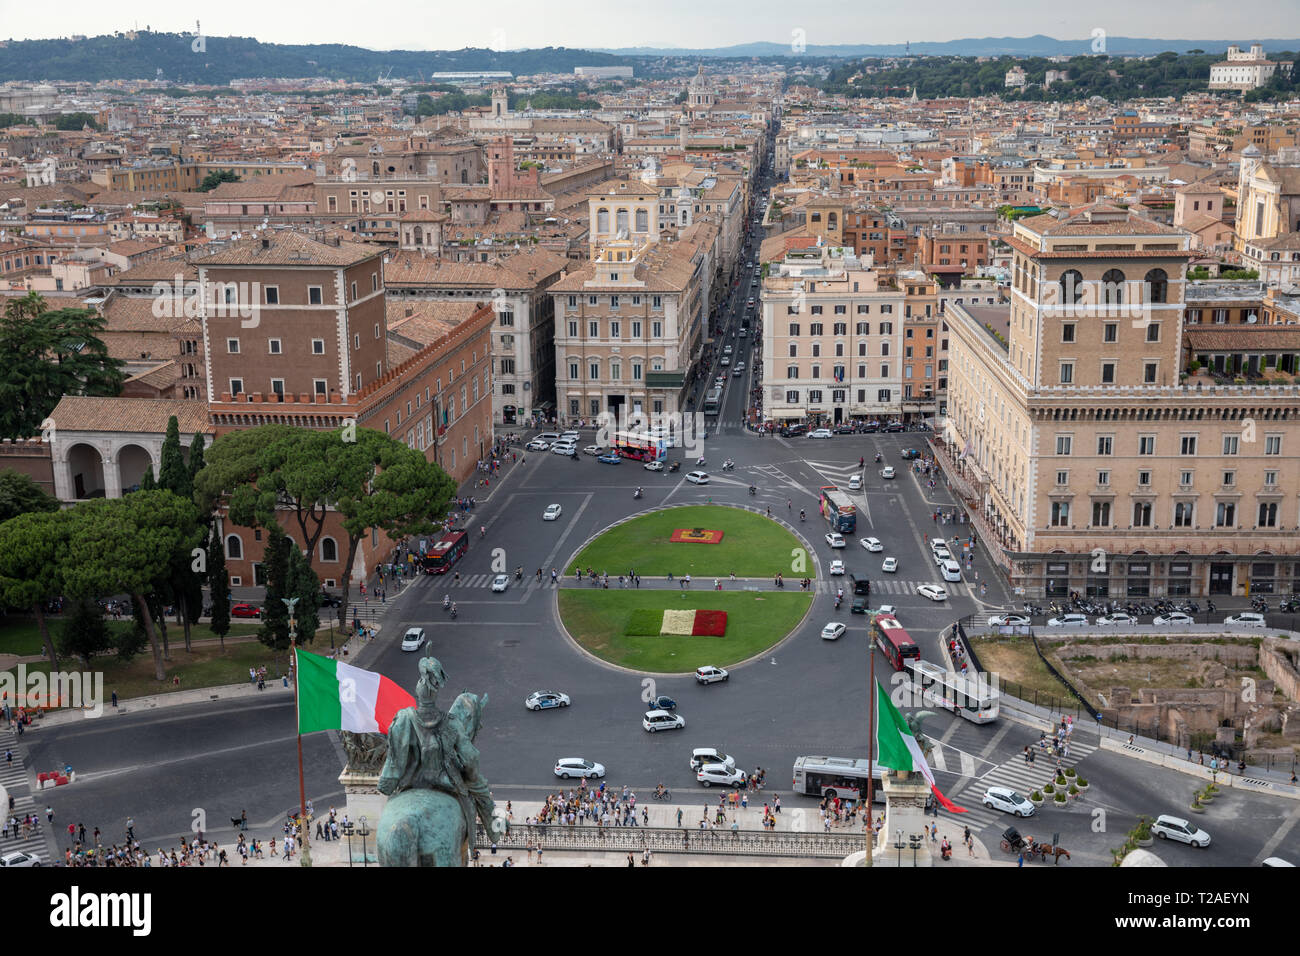 Rome, Italy - June 21, 2018: Panoramic view of Piazza Venezia and city from Vittorio Emanuele II Monument also known as the Vittoriano in Rome. Traffi Stock Photo